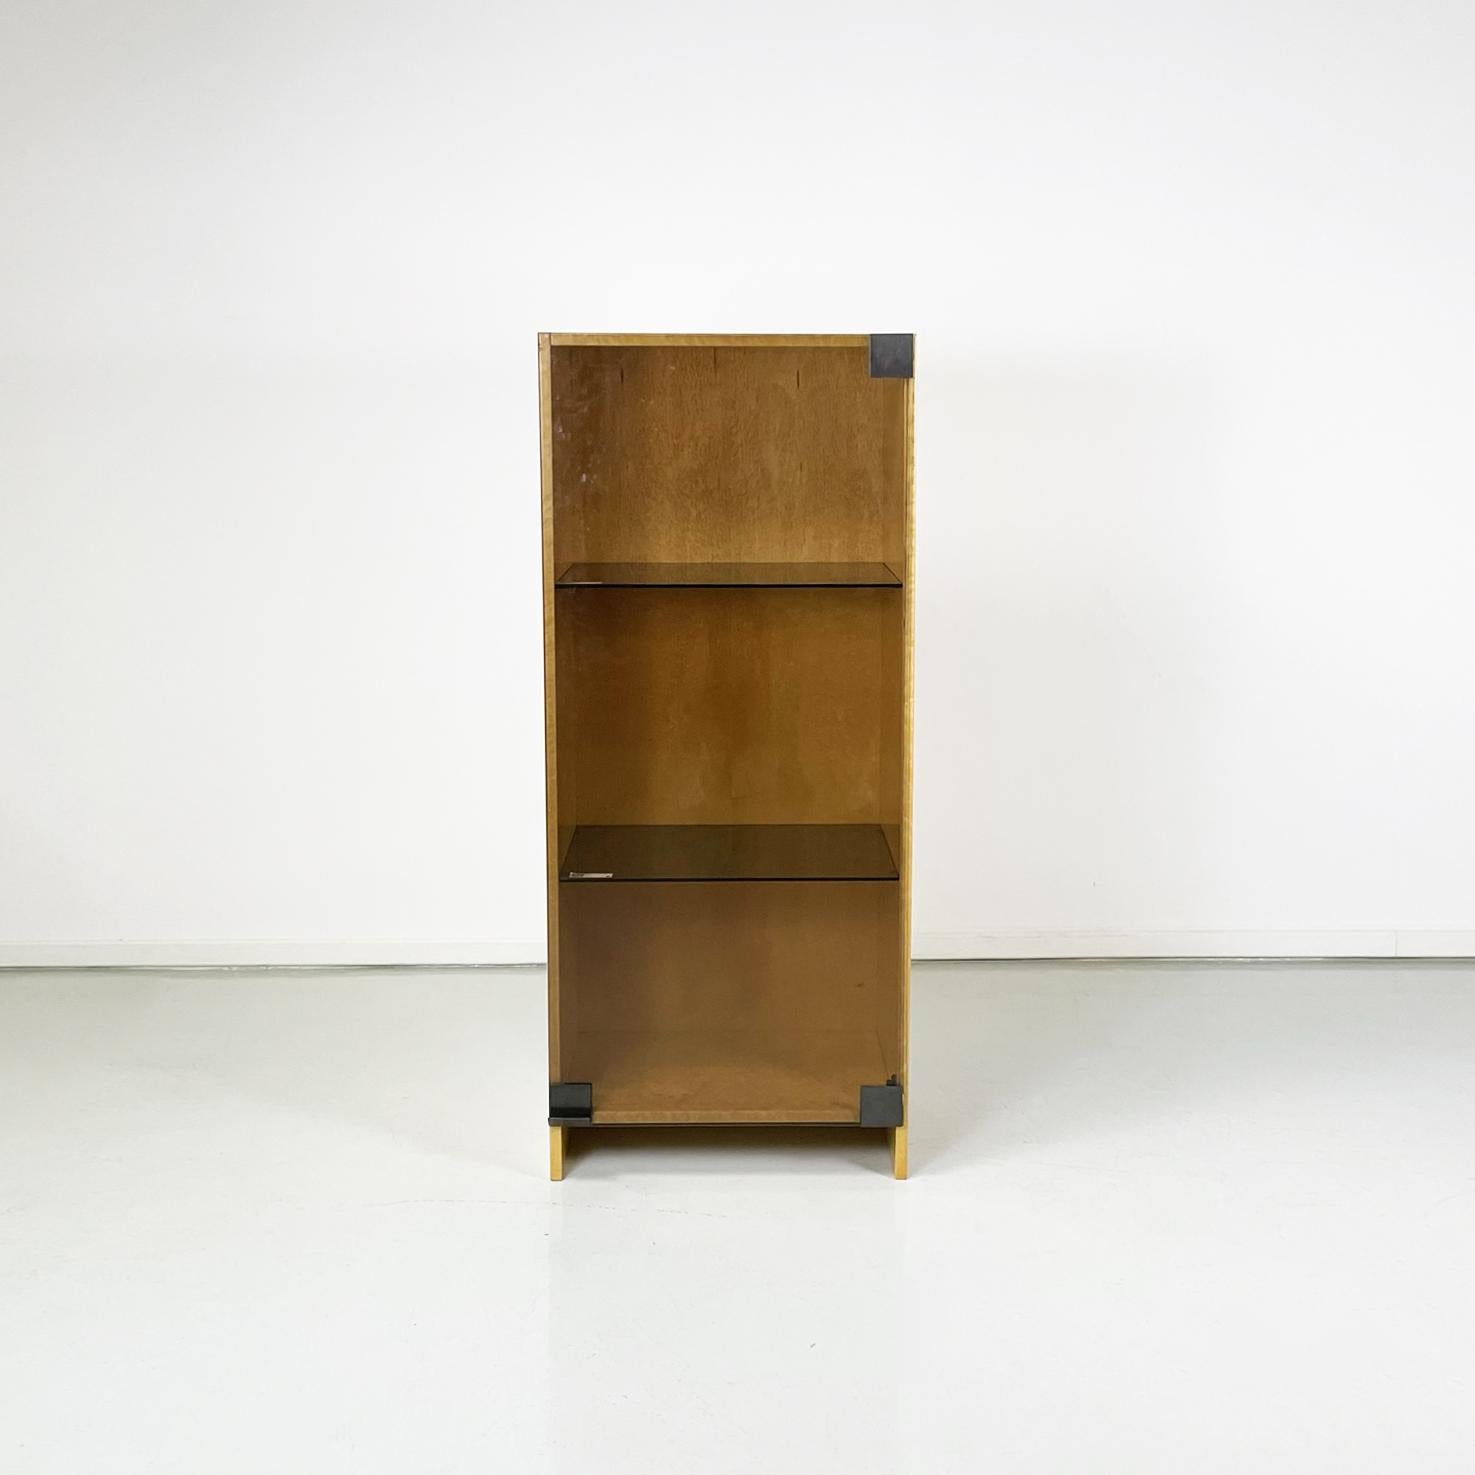 Italian modern Bookcase by Saporiti in light briar and smoked glass, 1970s
Rectangular wall bookcase or sideboard in light briar. It has of a hinged door in smoked glass, inside there are 3 compartments with 2 shelves in smoked glass.
Produced by